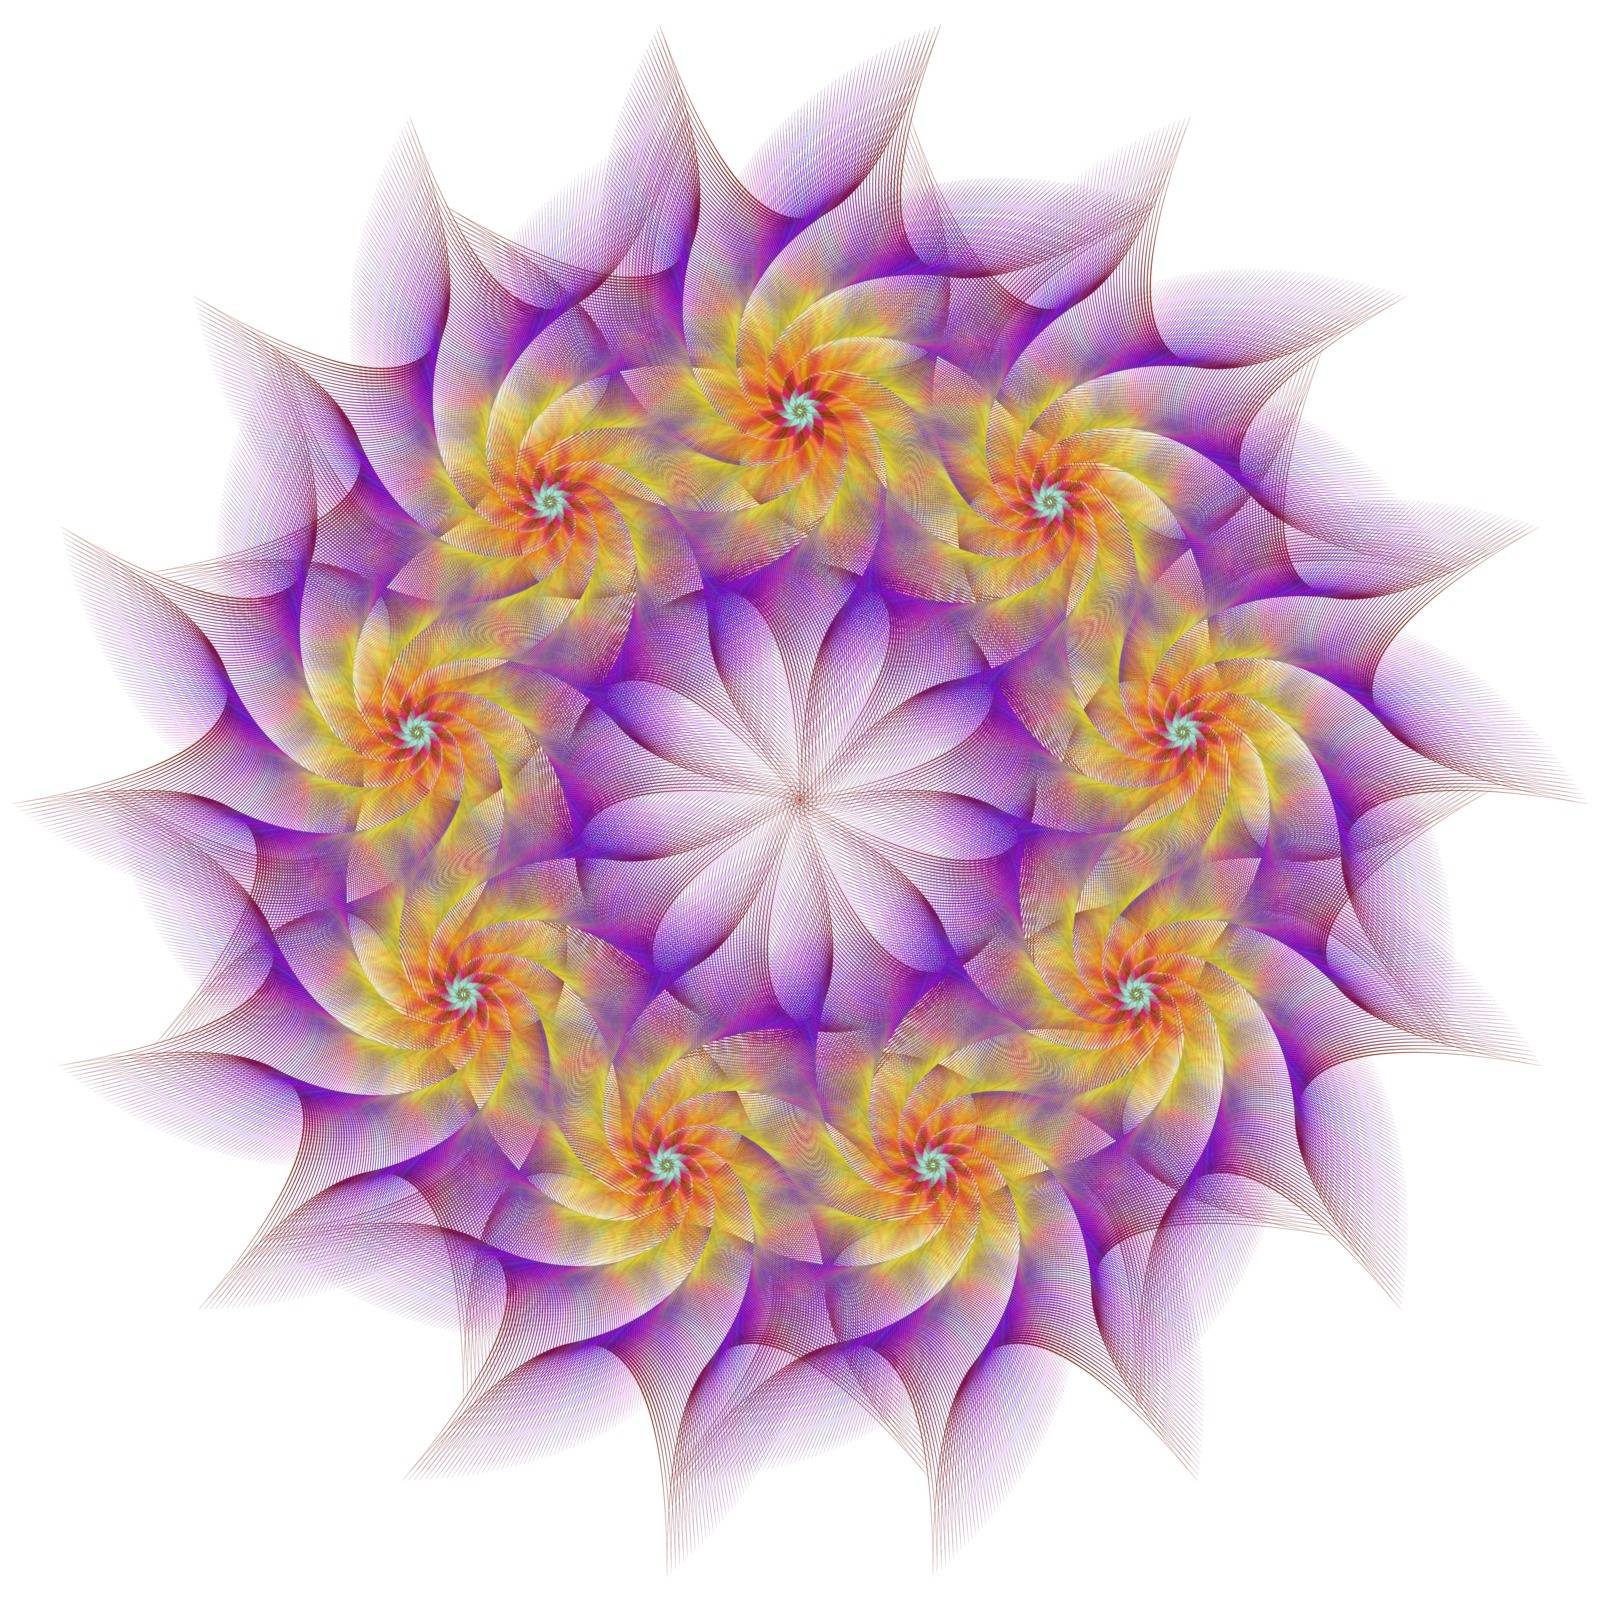 Purple, yellow and red circular fractal flower design